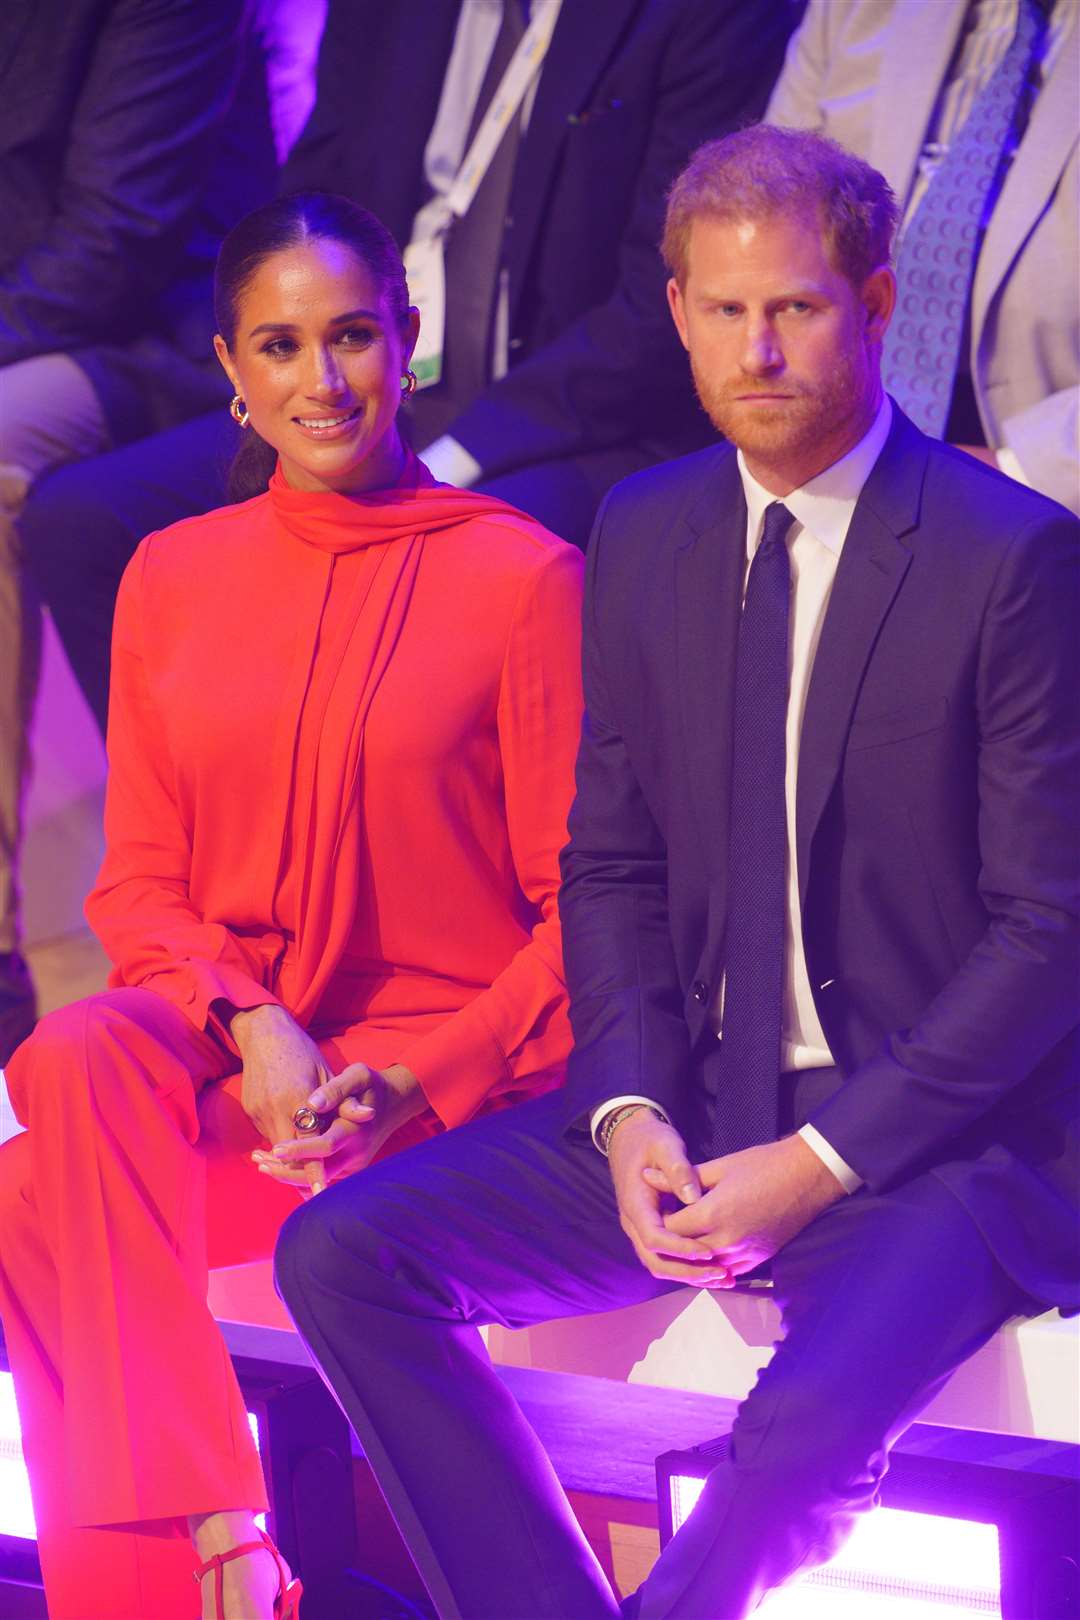 The Sussexes on stage (Peter Byrne/PA)